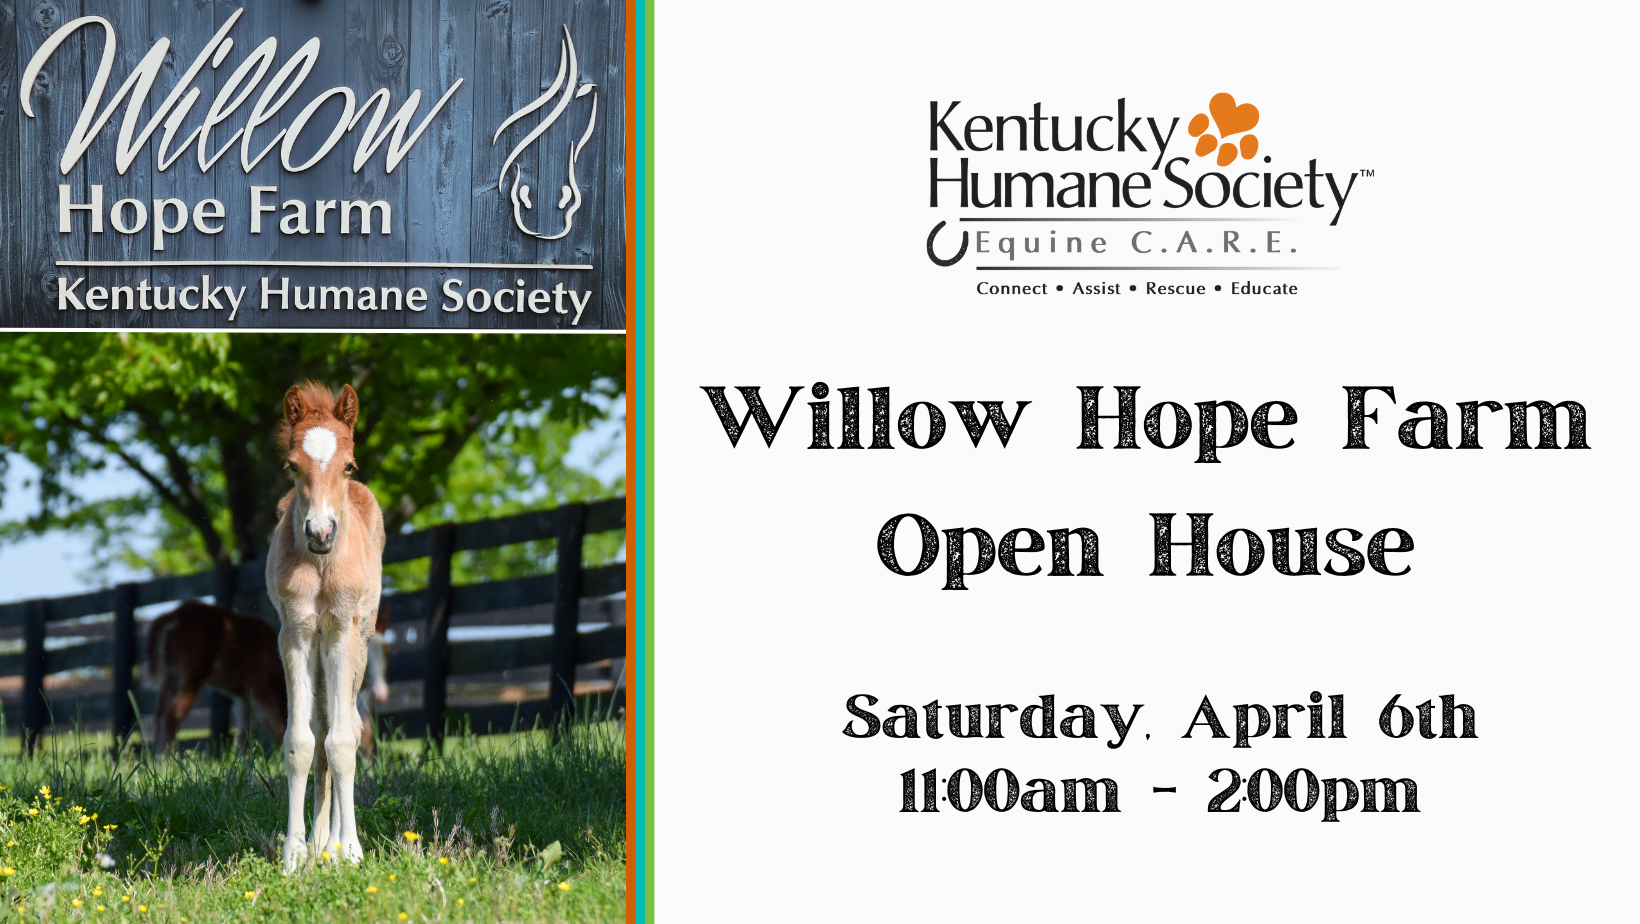 Willow Hope Farm Open House